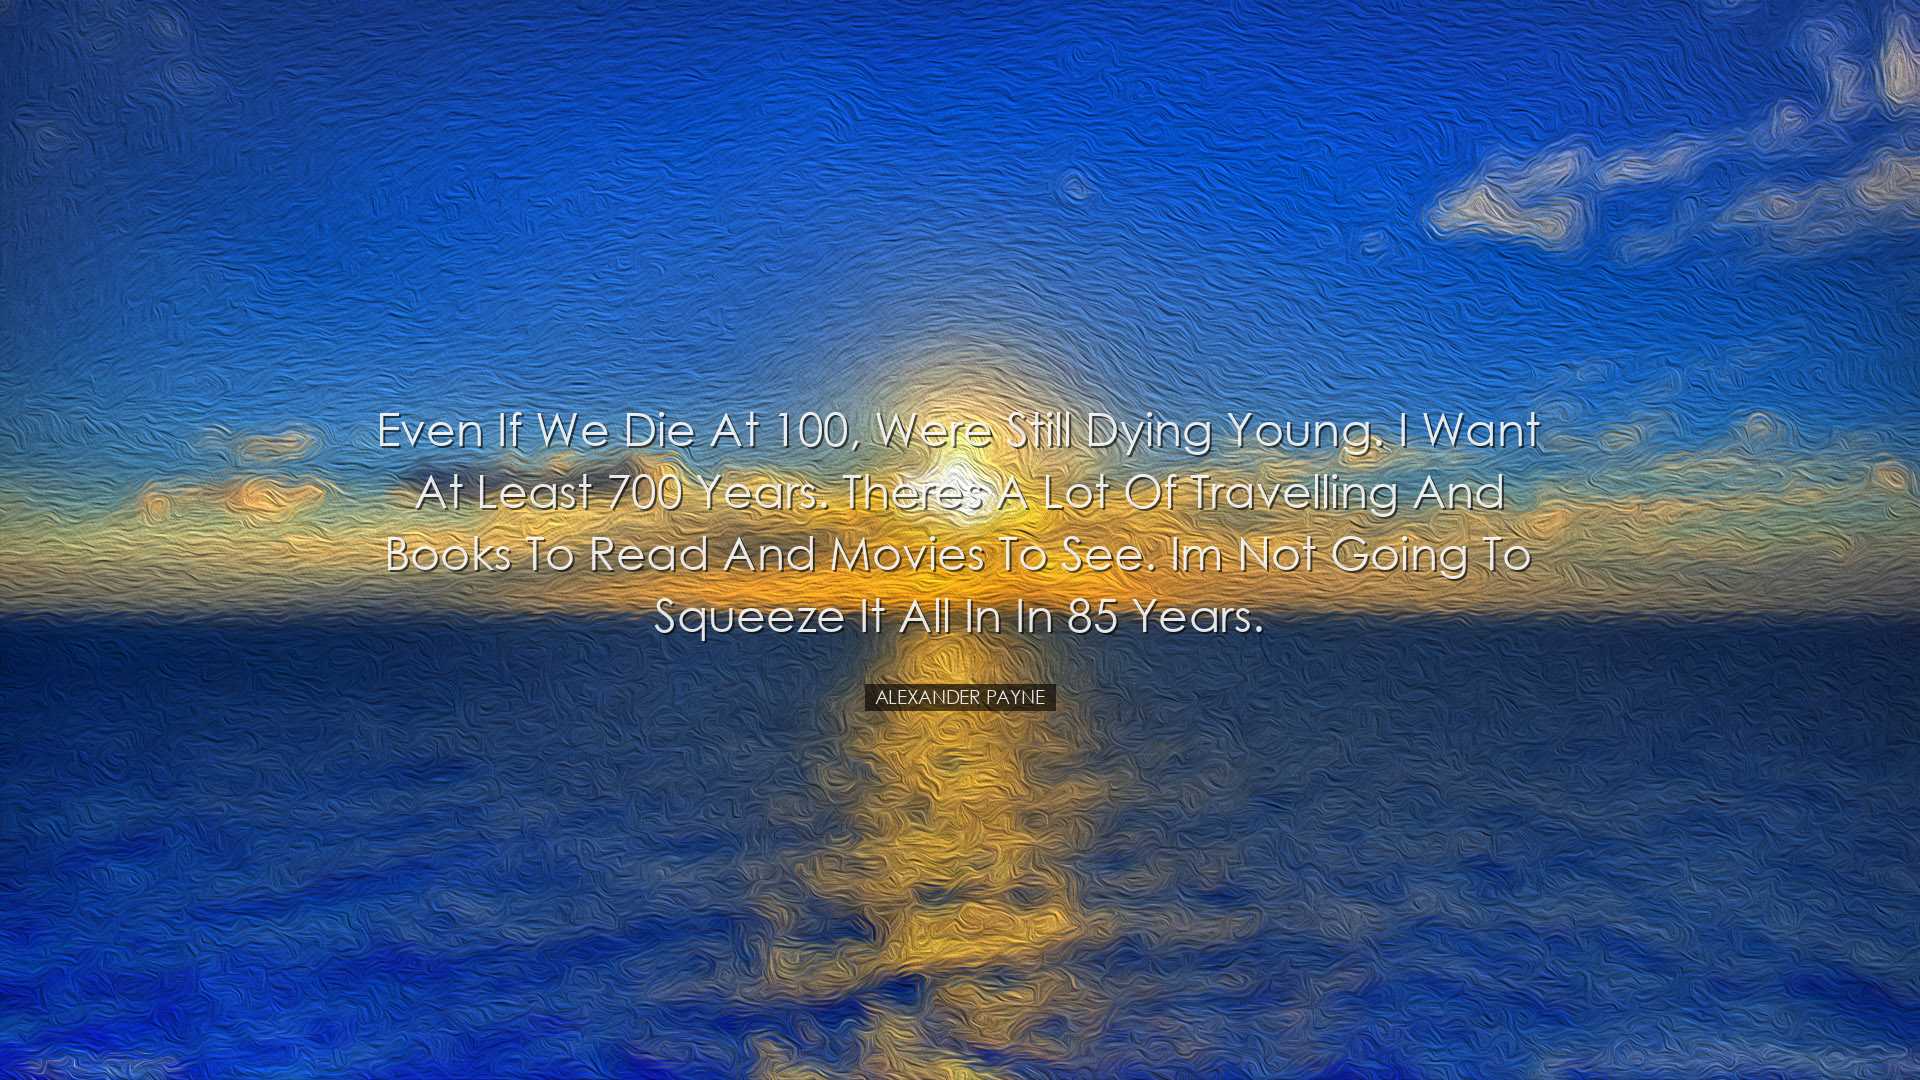 Even if we die at 100, were still dying young. I want at least 700